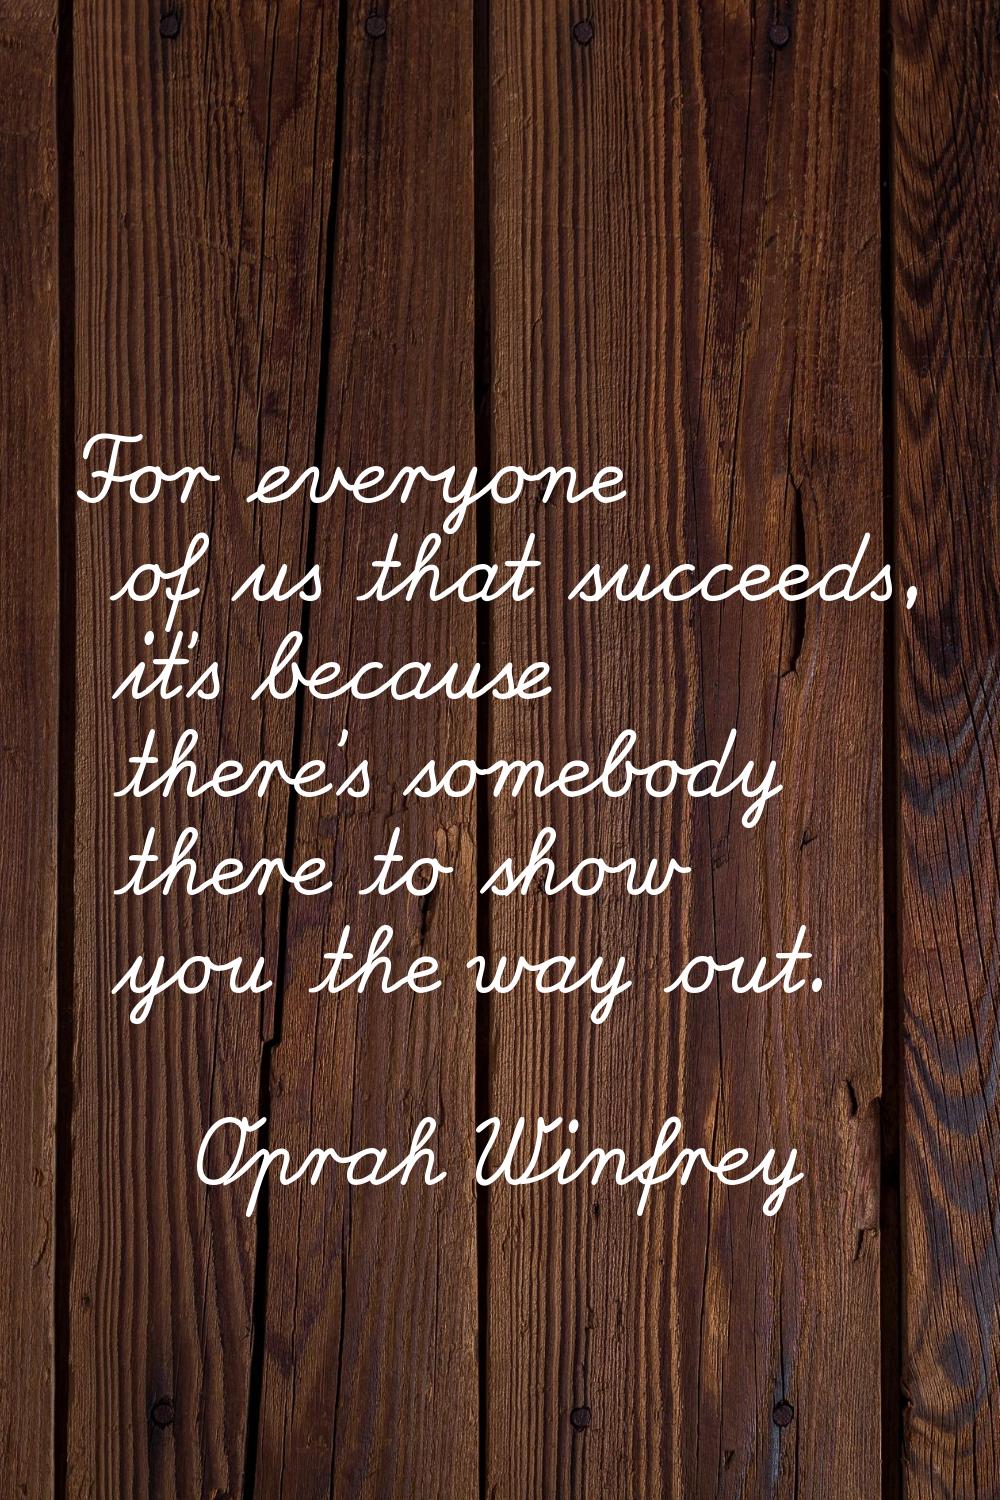 For everyone of us that succeeds, it's because there's somebody there to show you the way out.